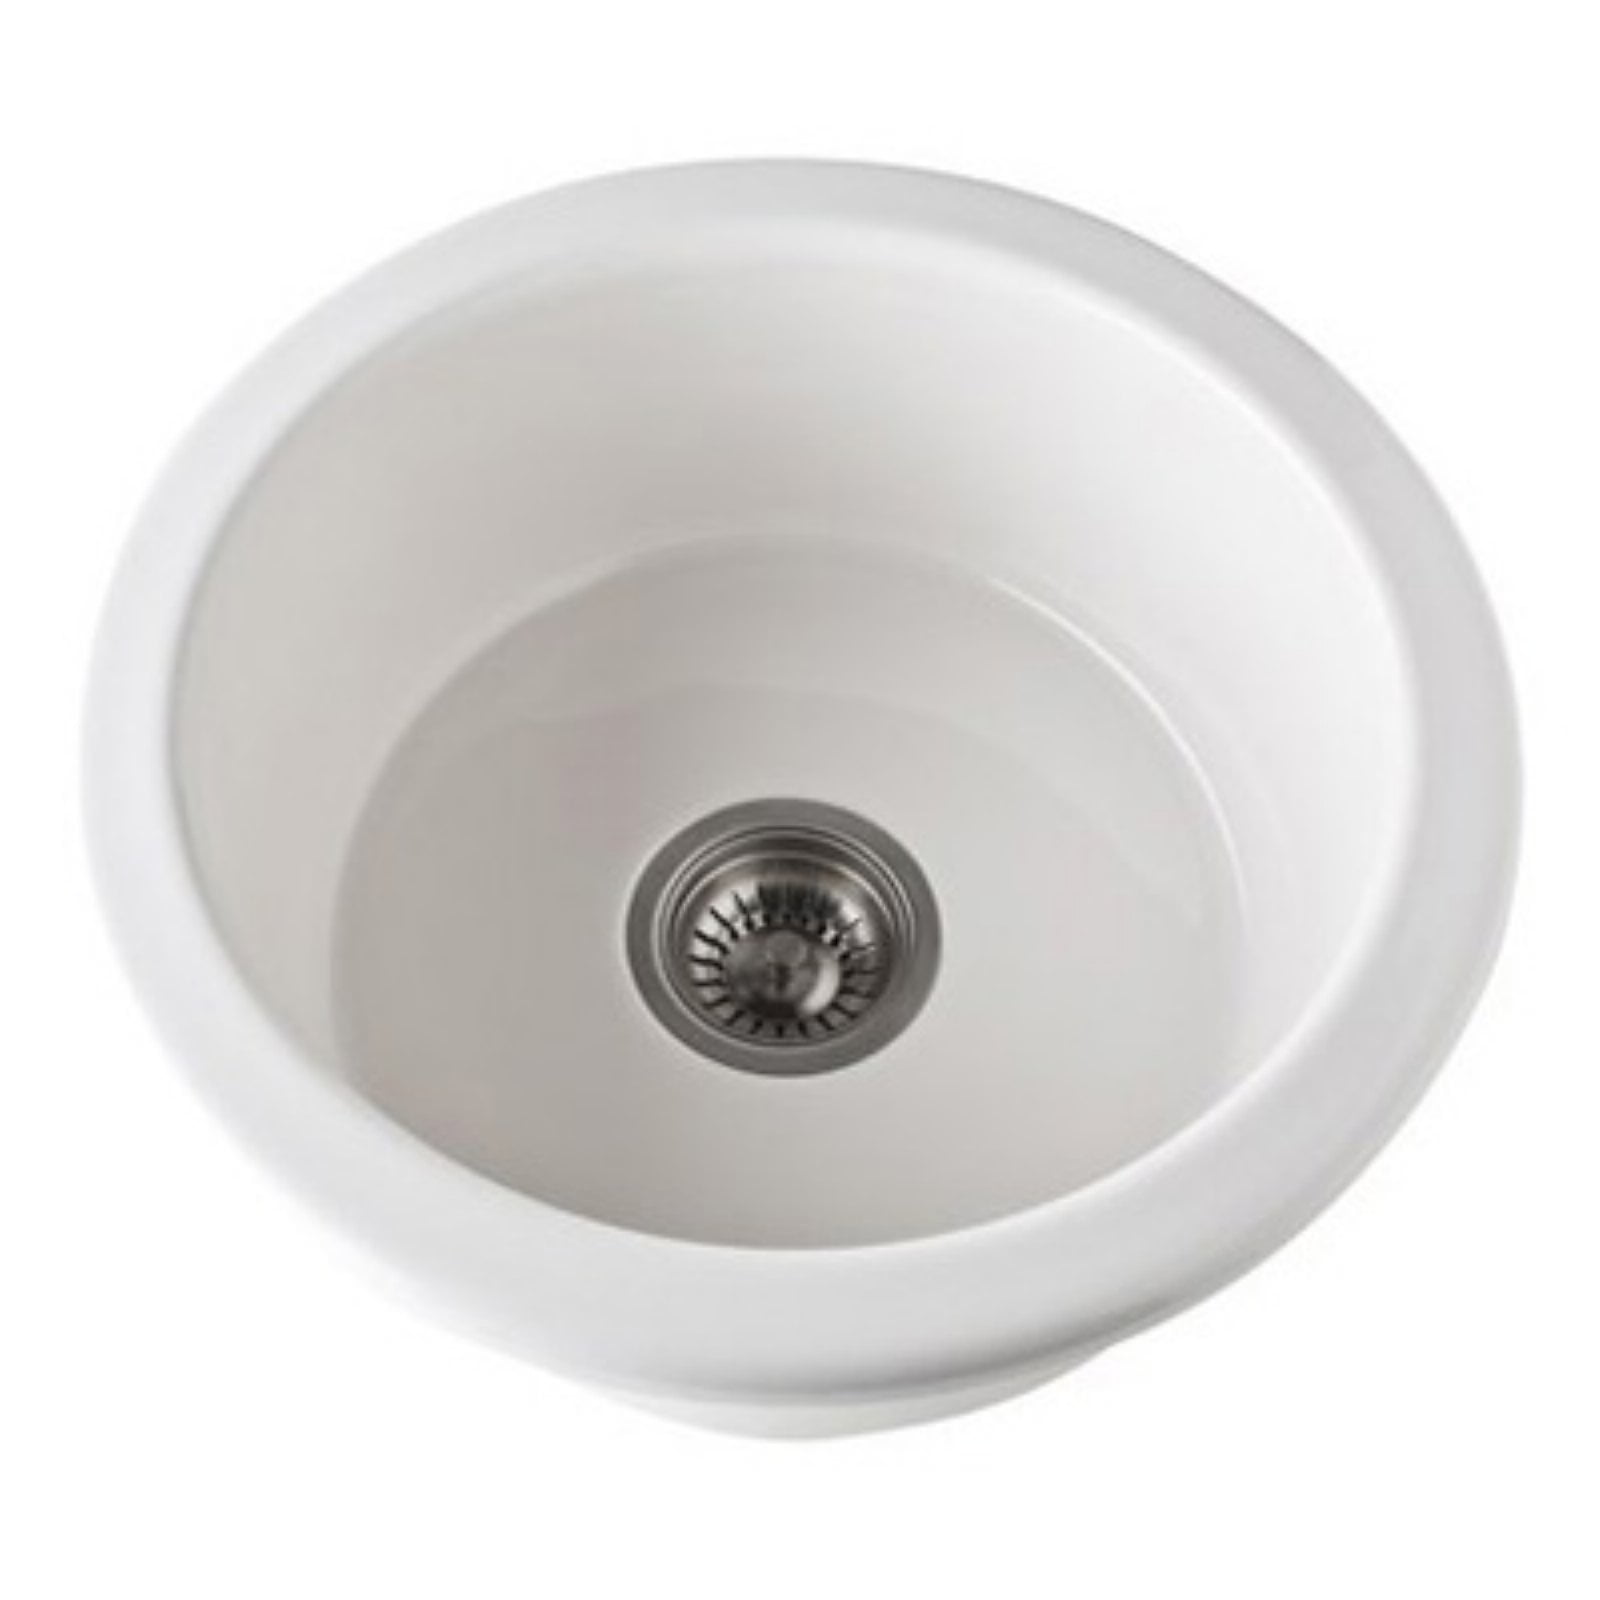 Rohl Allia 18 Undermount Fireclay Bar Sink Available In Various Colors